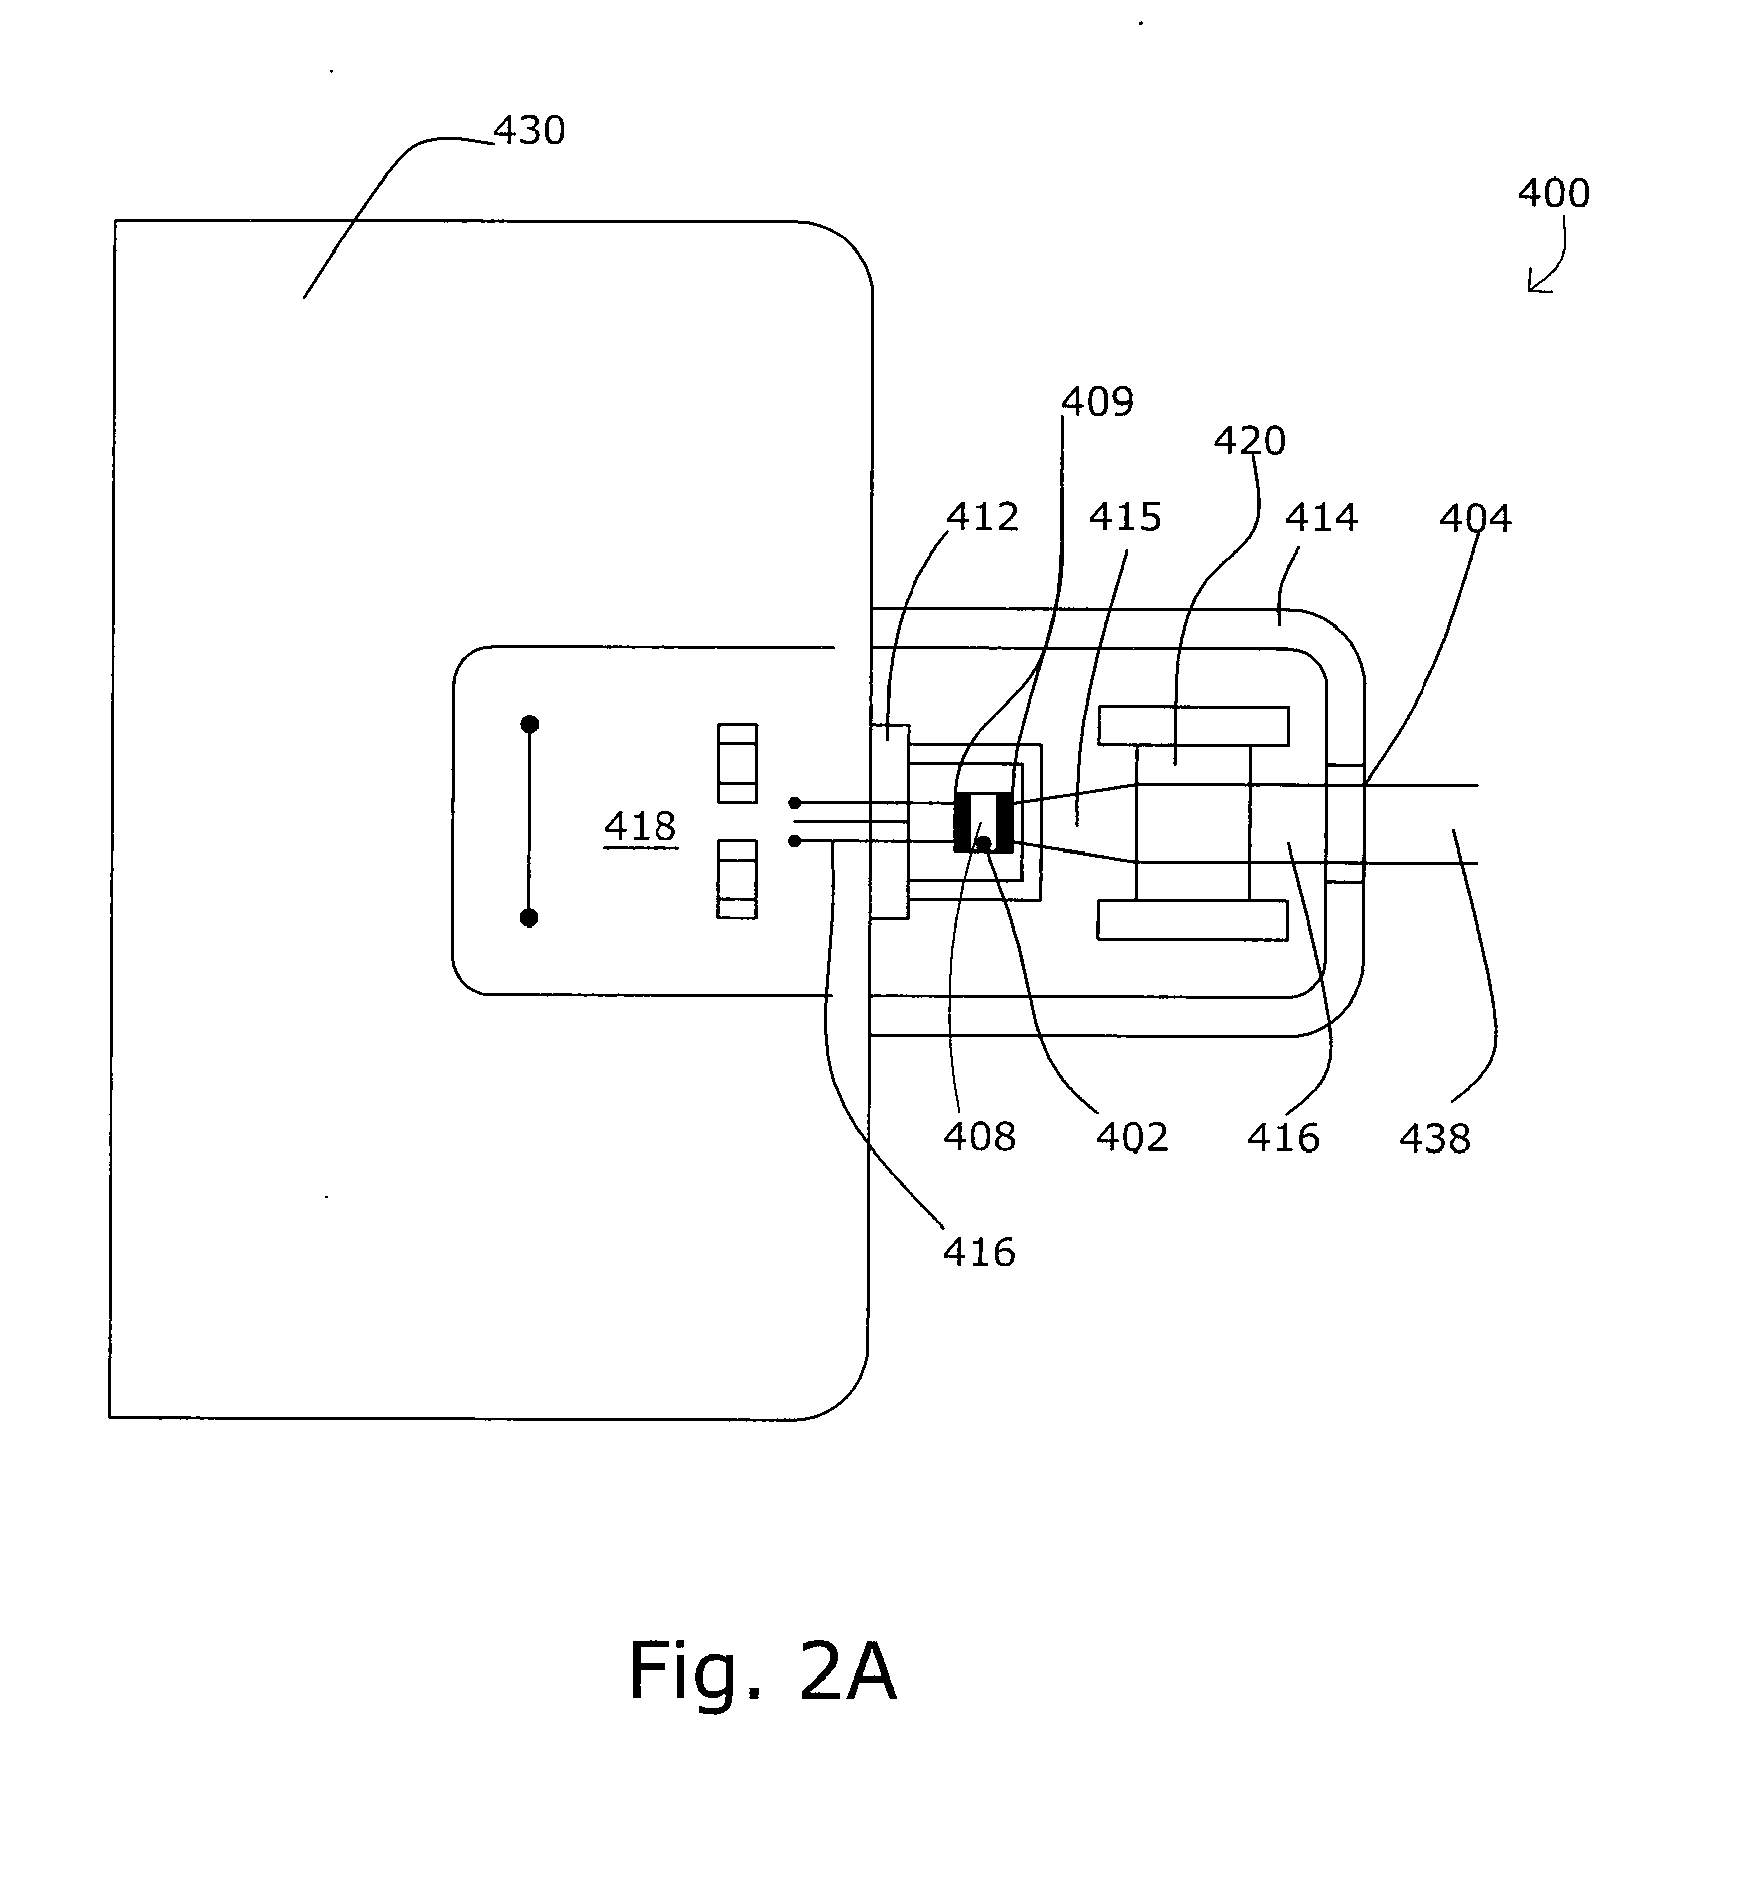 Projection-type display devices with reduced speckle